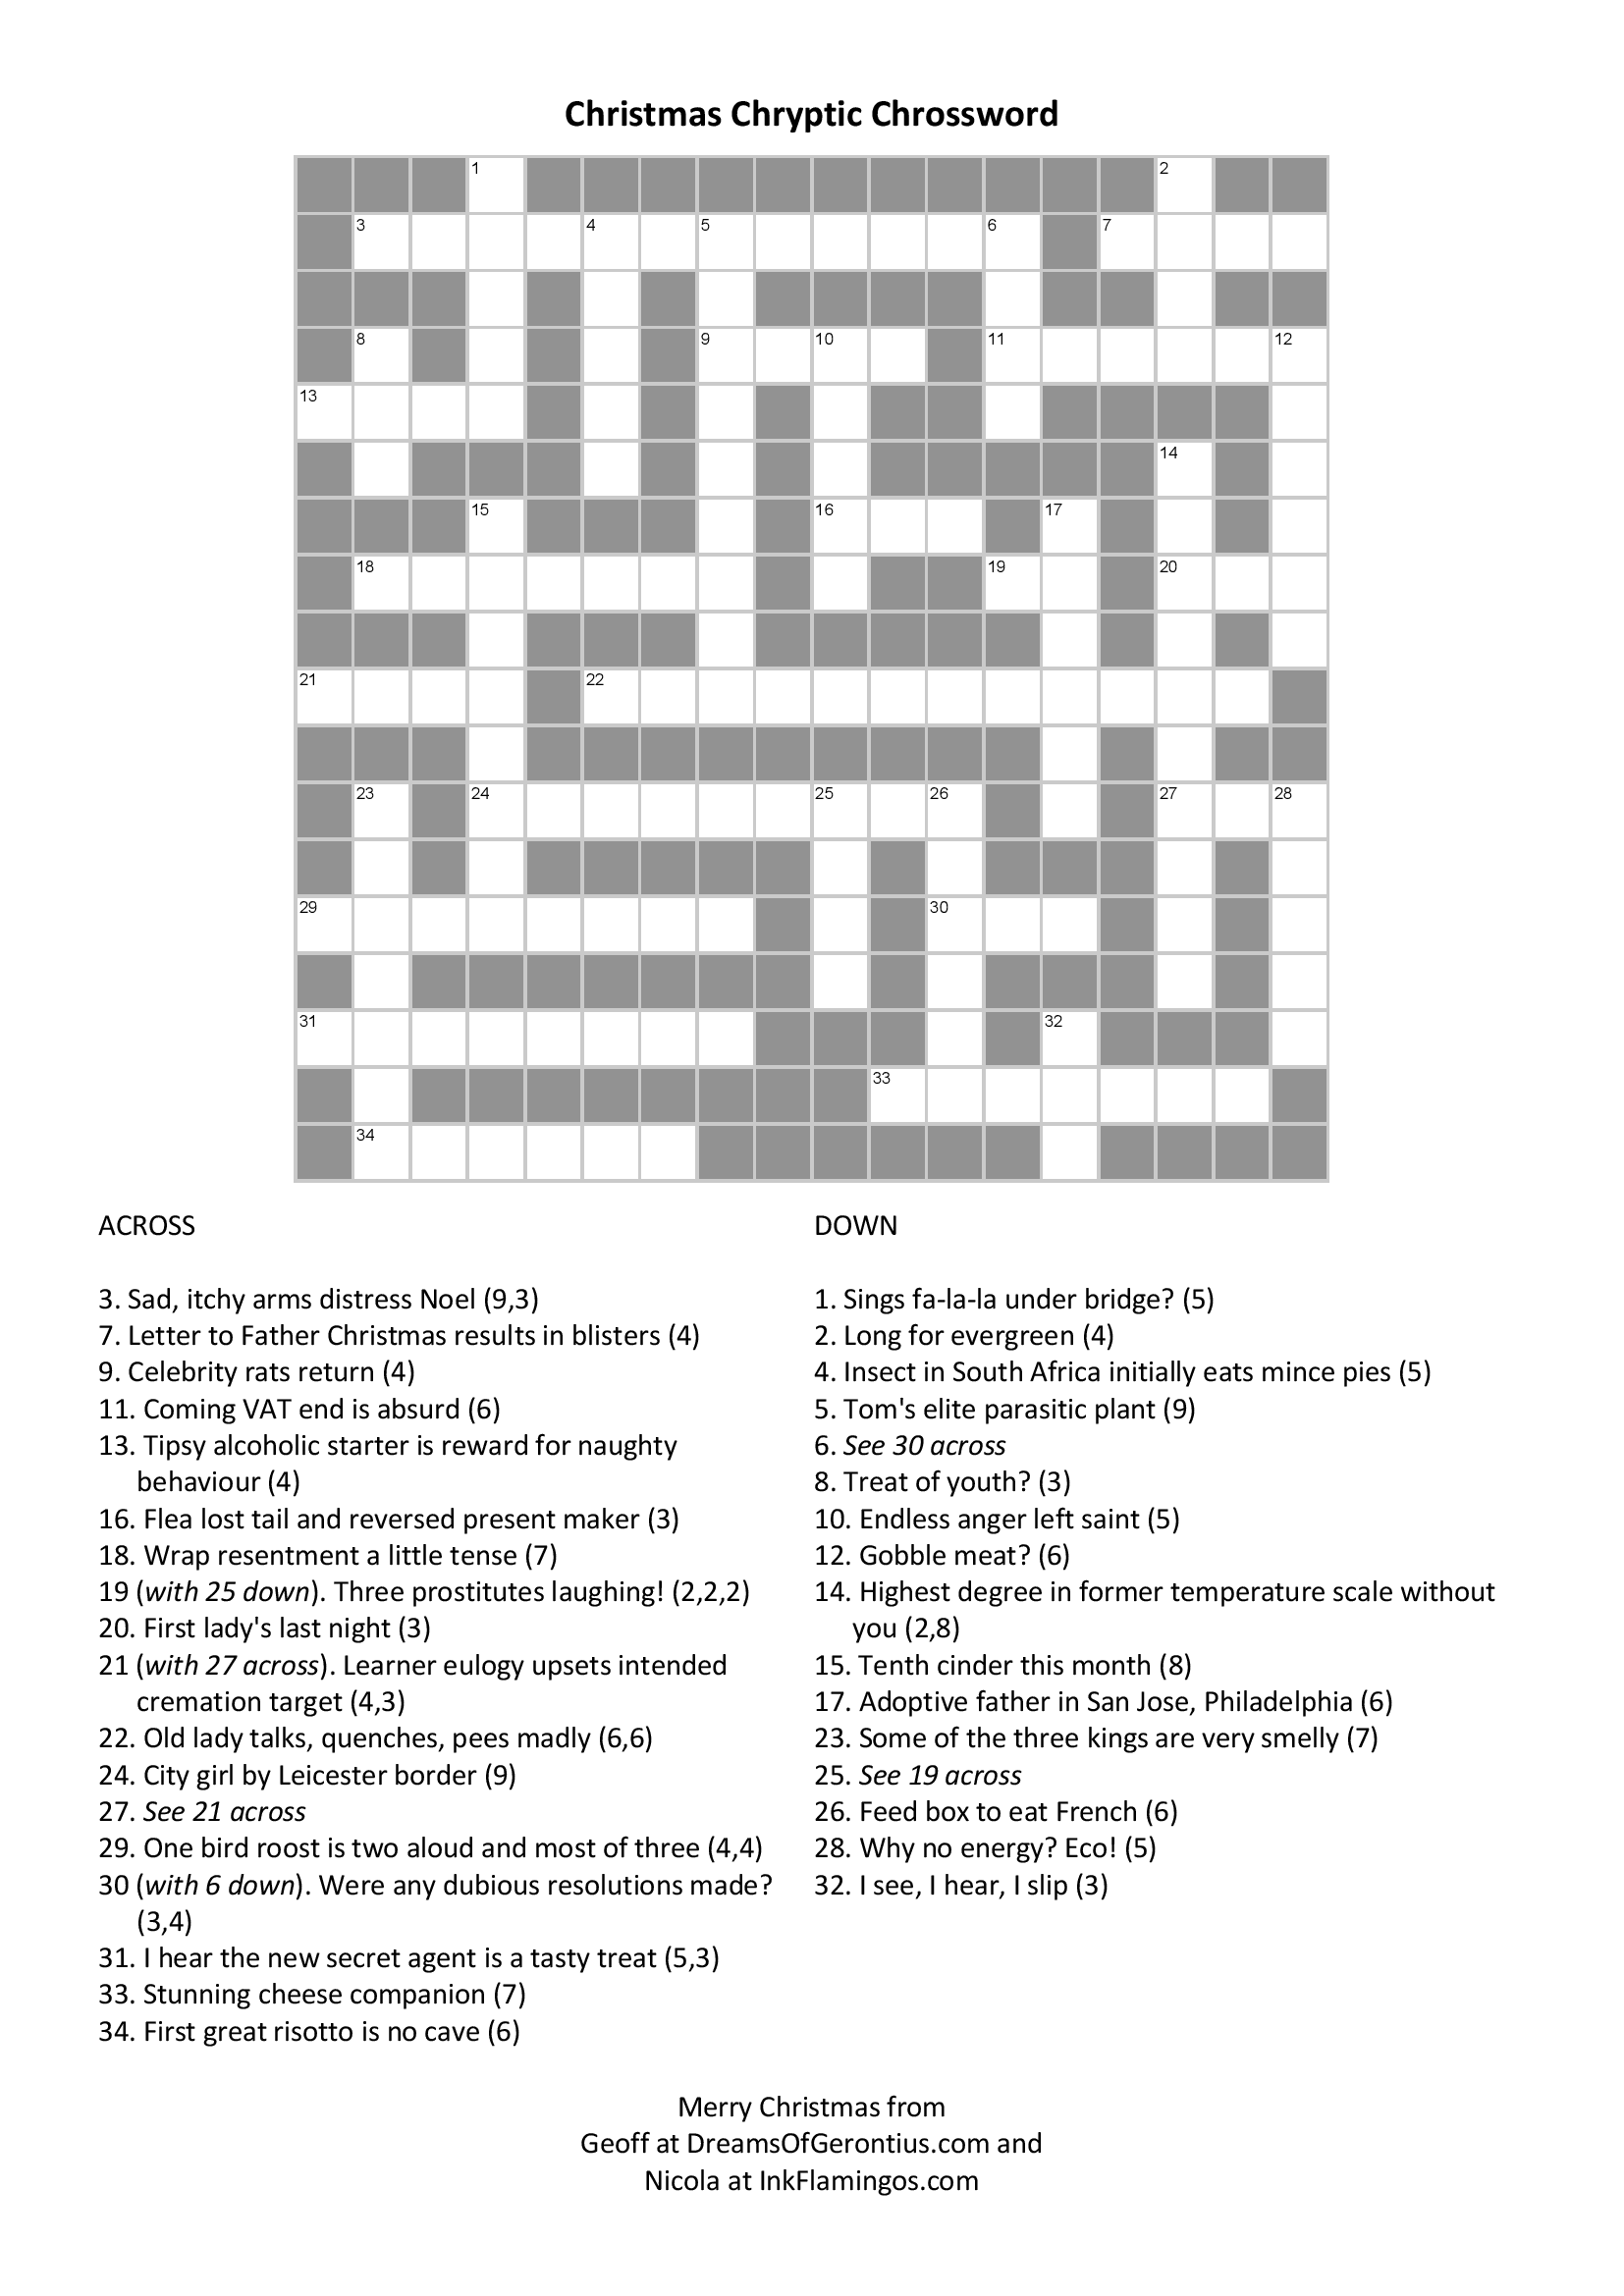 Cryptic Crossword Primer for Christmas The Dreams of Gerontius